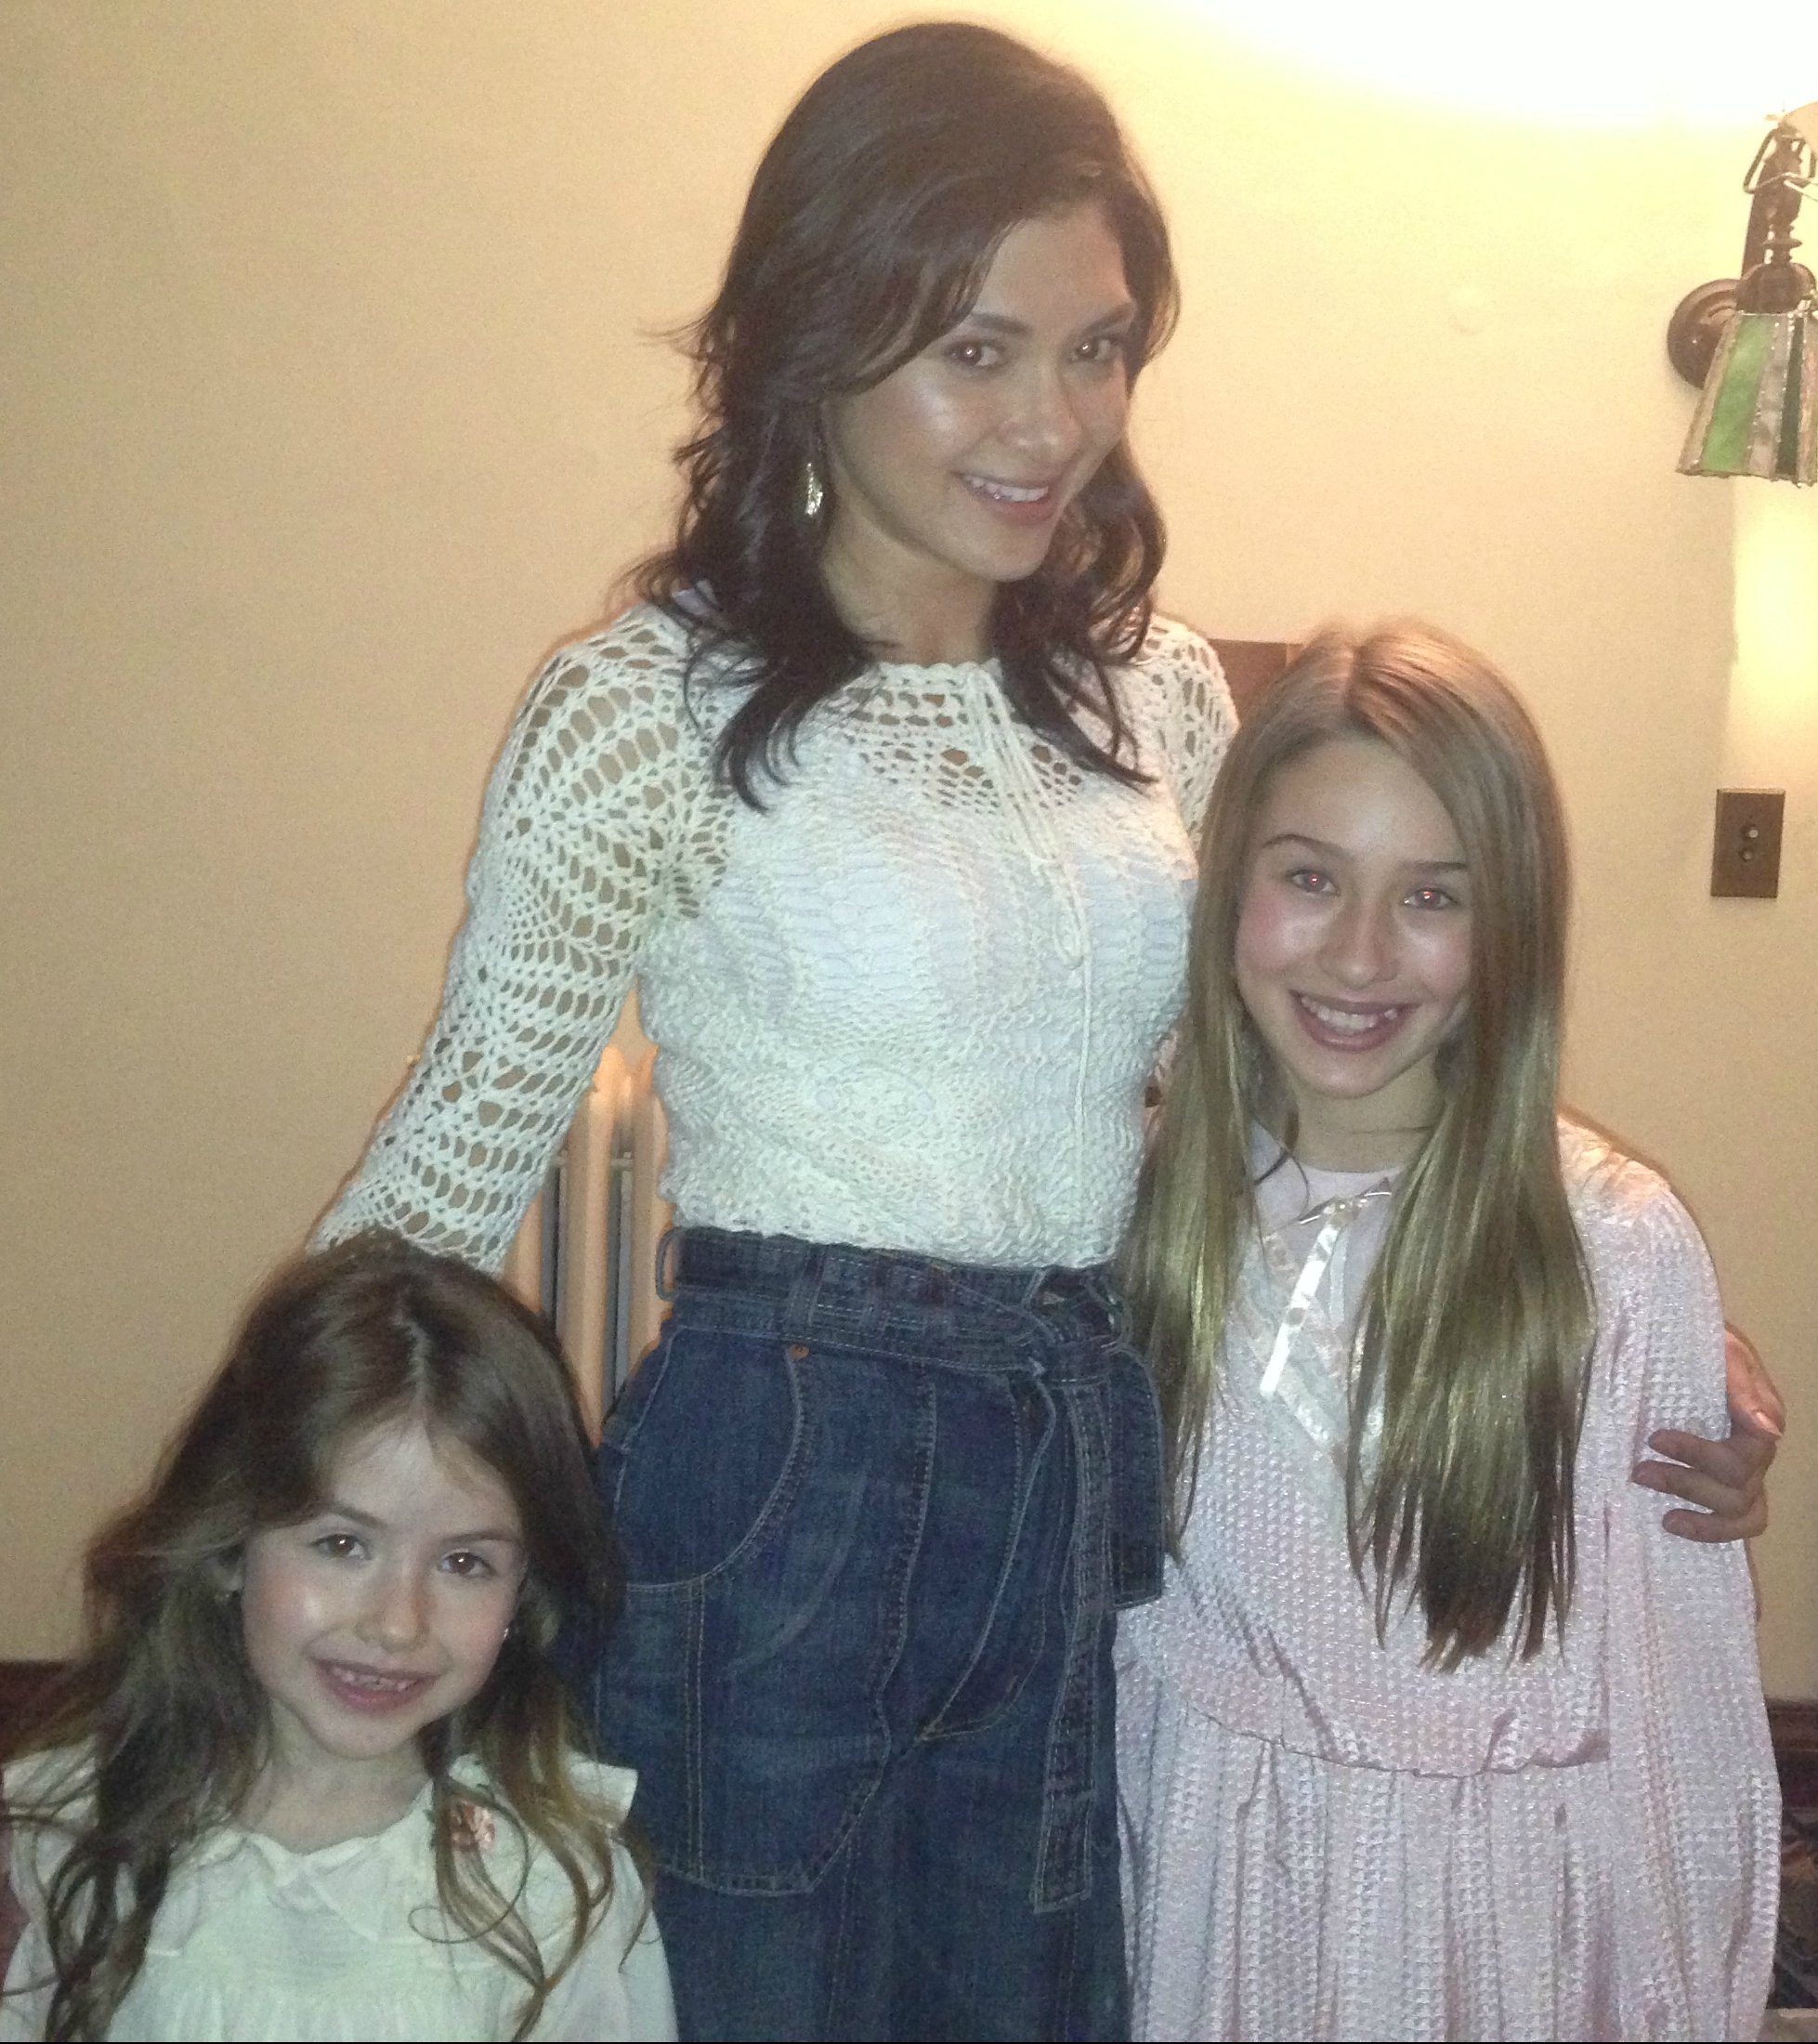 Kylie on the Celebrity Ghost Stories shoot with Maria DeSimone and Jessica Kuretski.